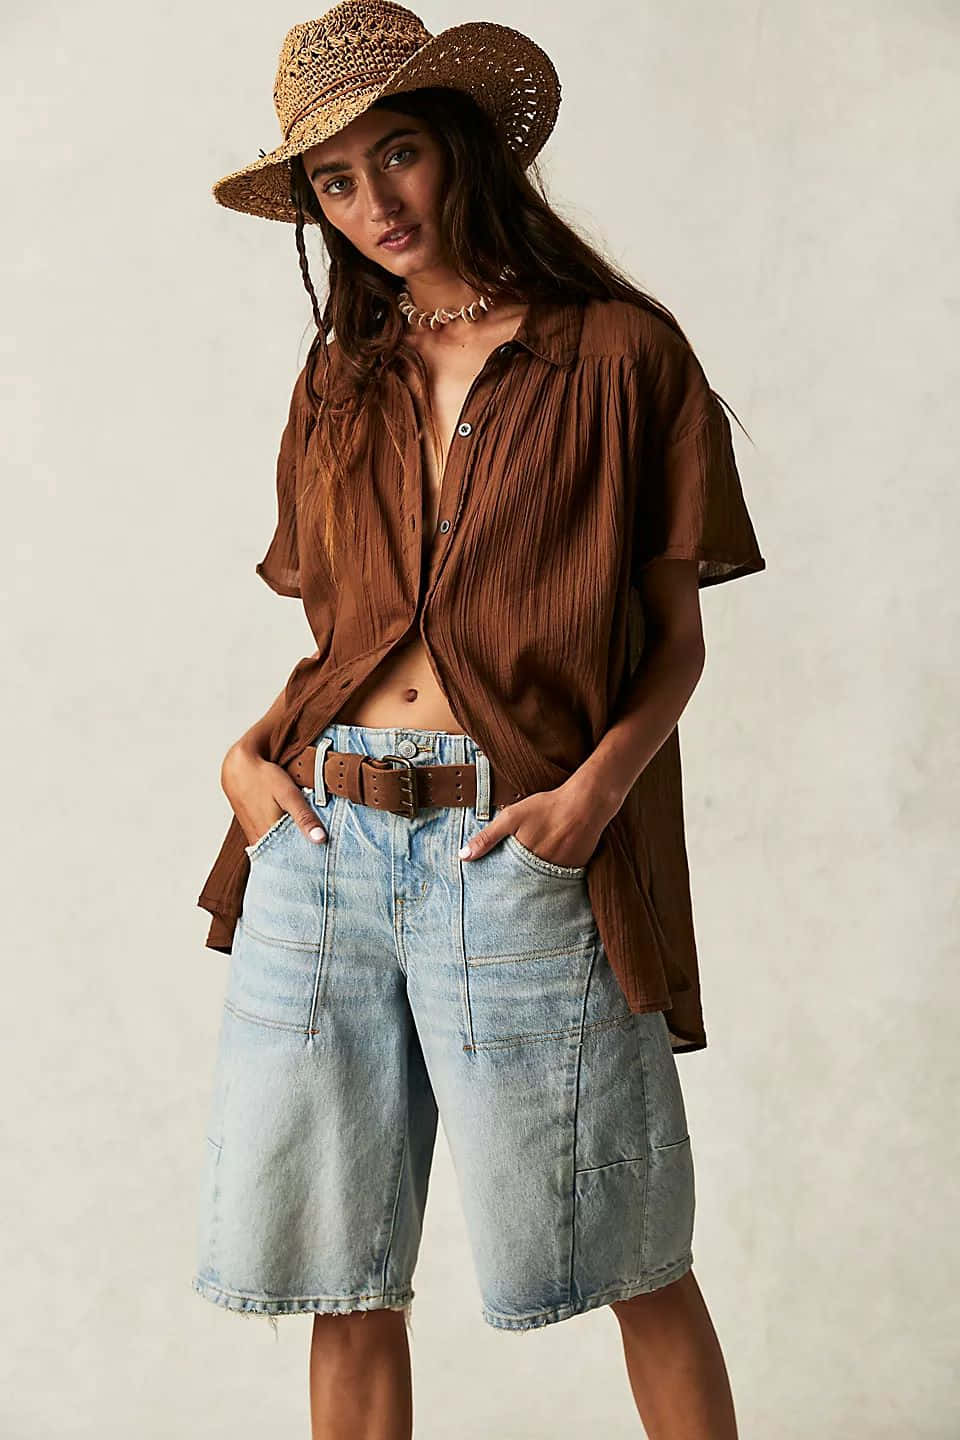 Coastal Cowgirl Chic Outfit.jpg Wallpaper